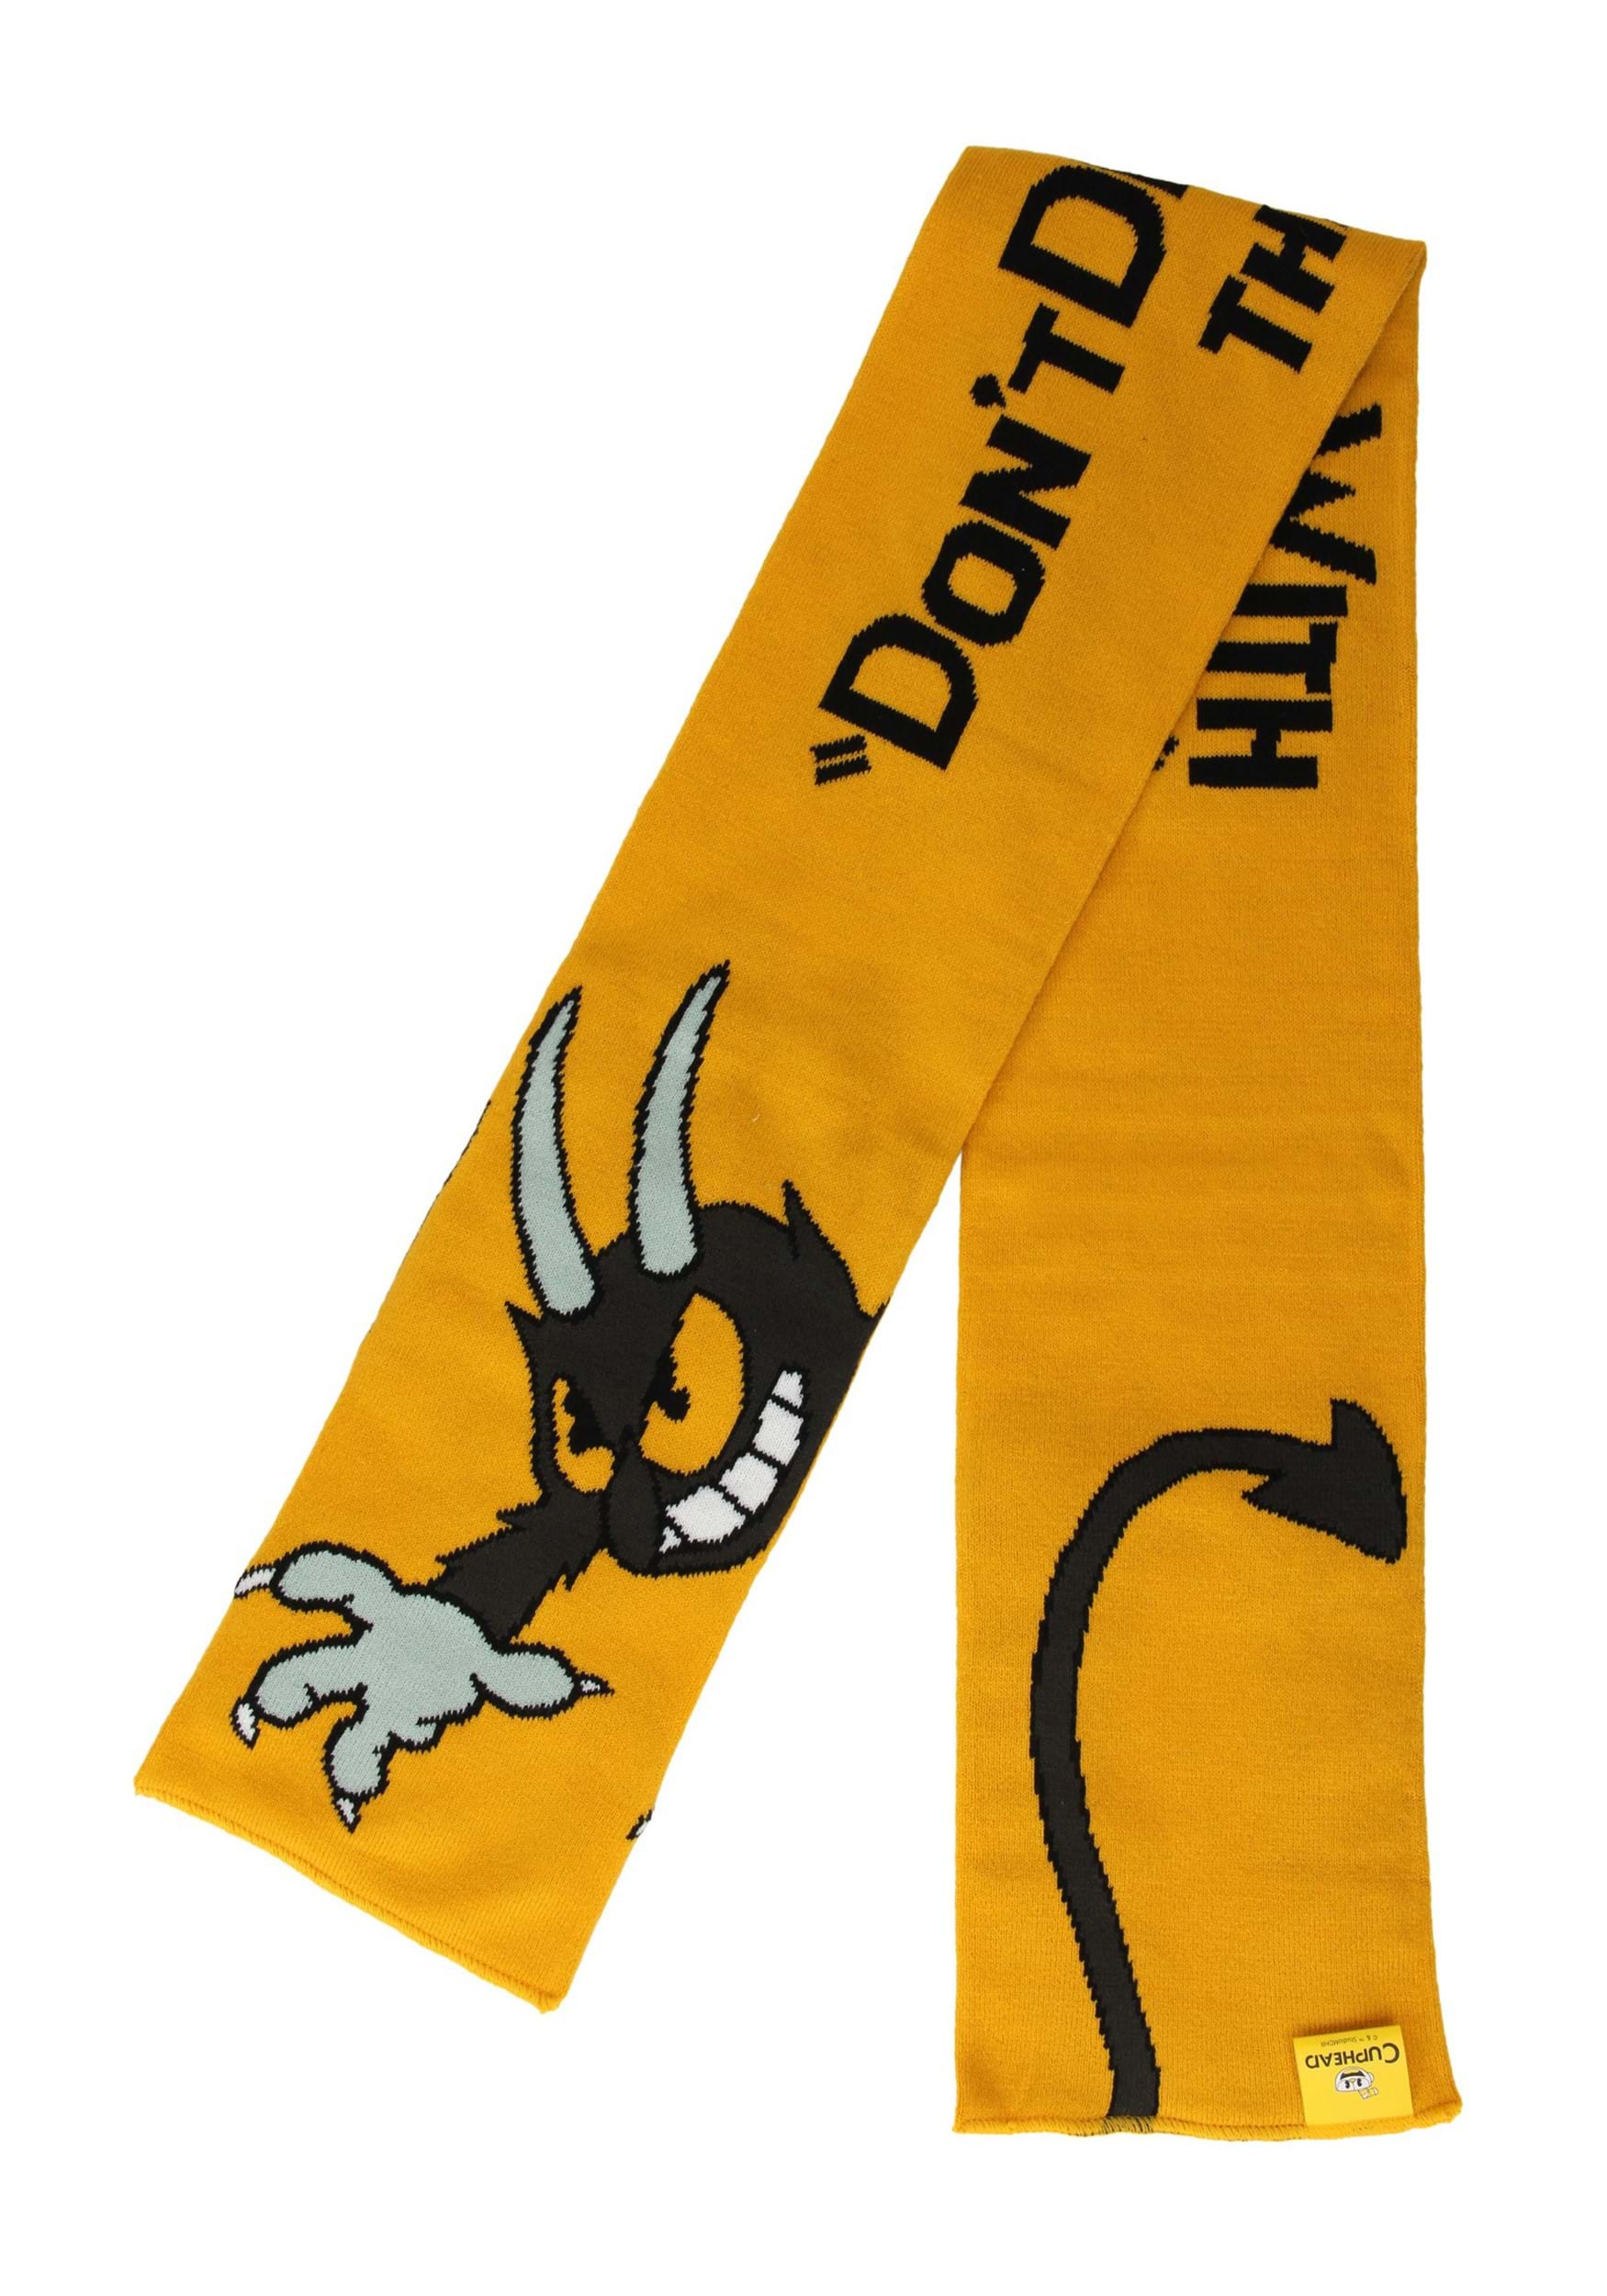 The Devil Knit Scarf: Cuphead